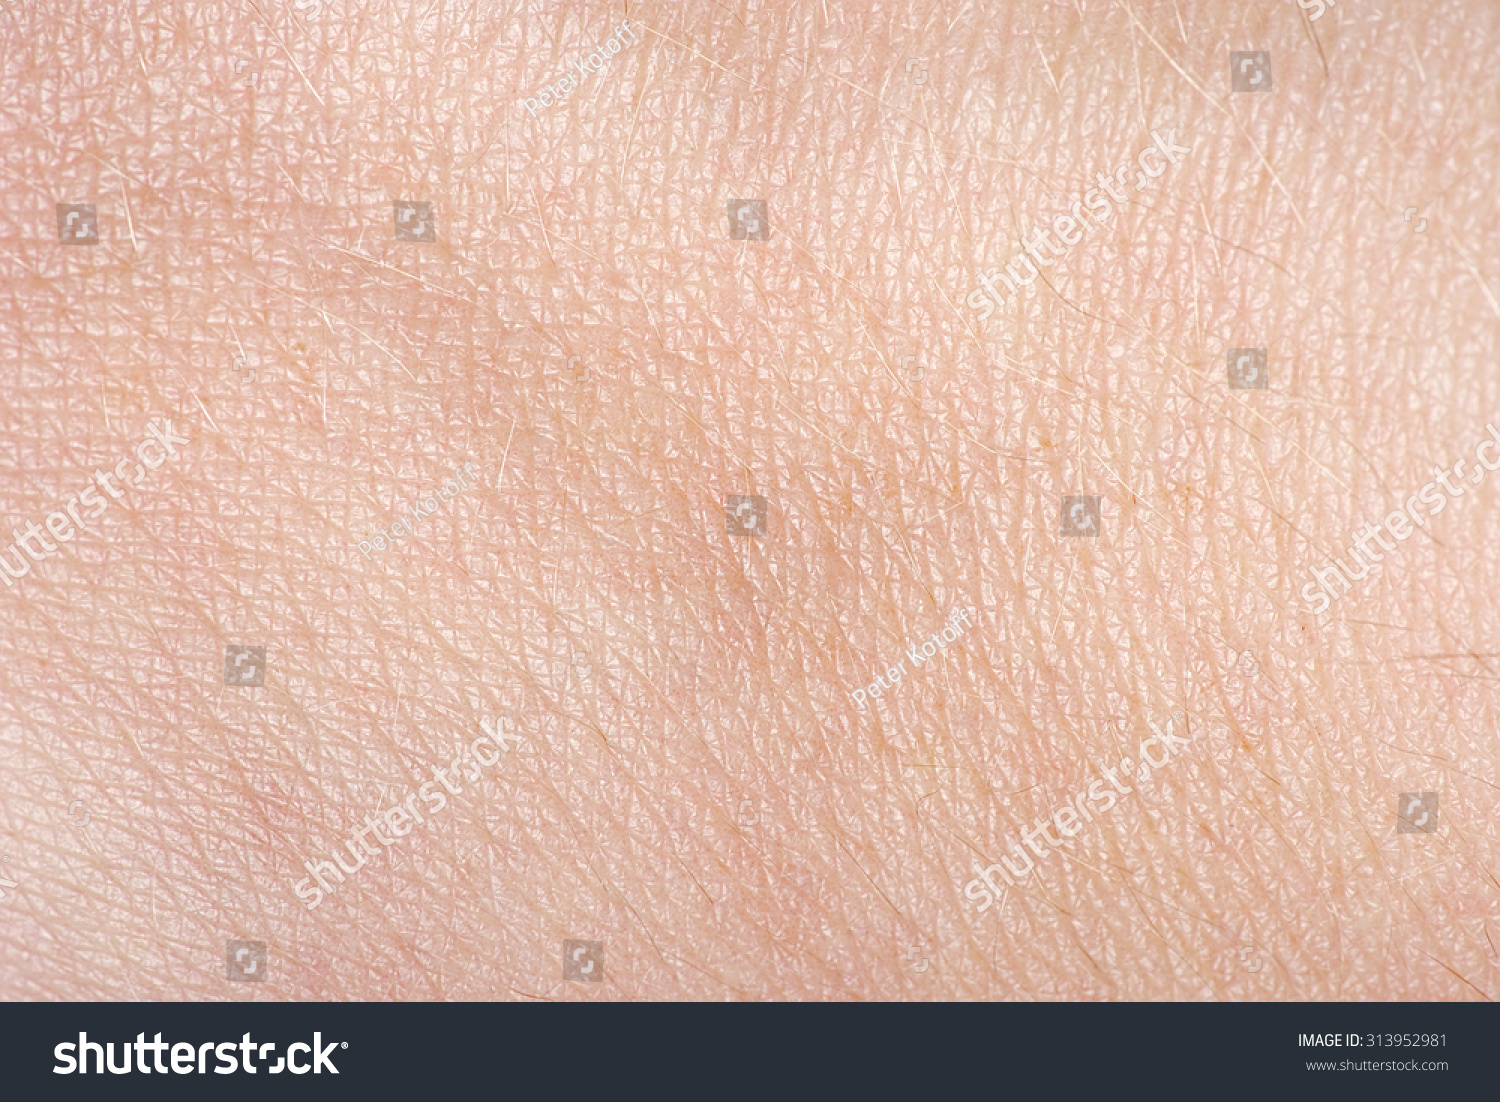 The texture of the skin #313952981